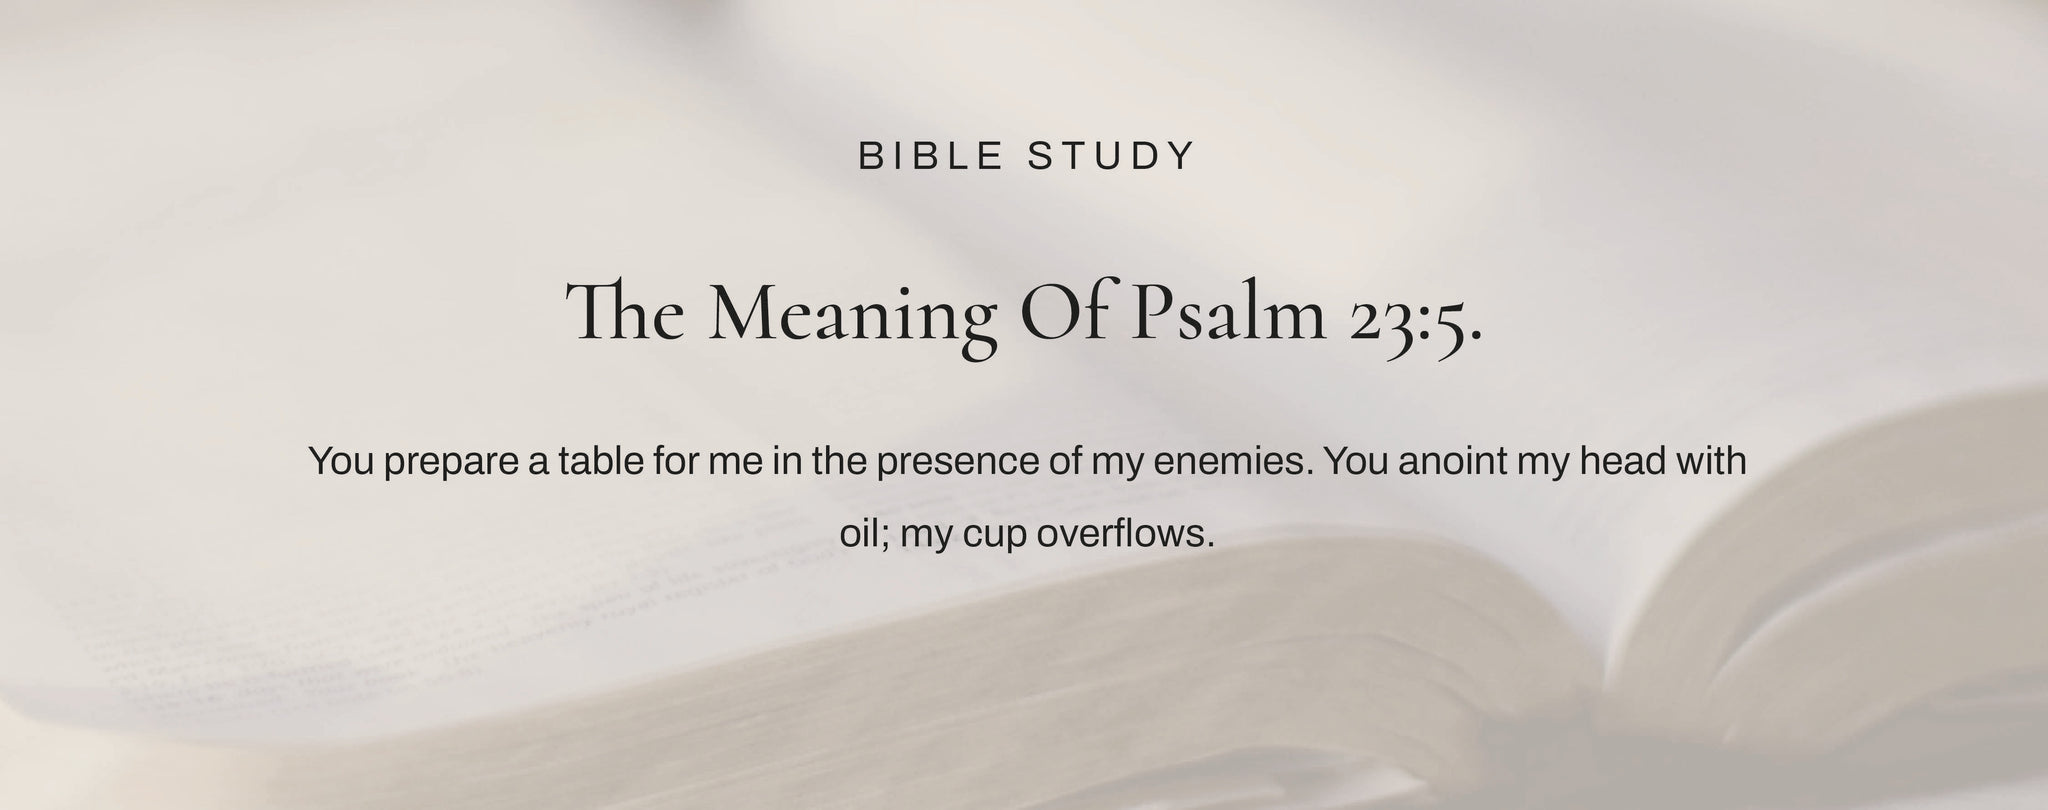 What Does Psalm 23:5 Mean?